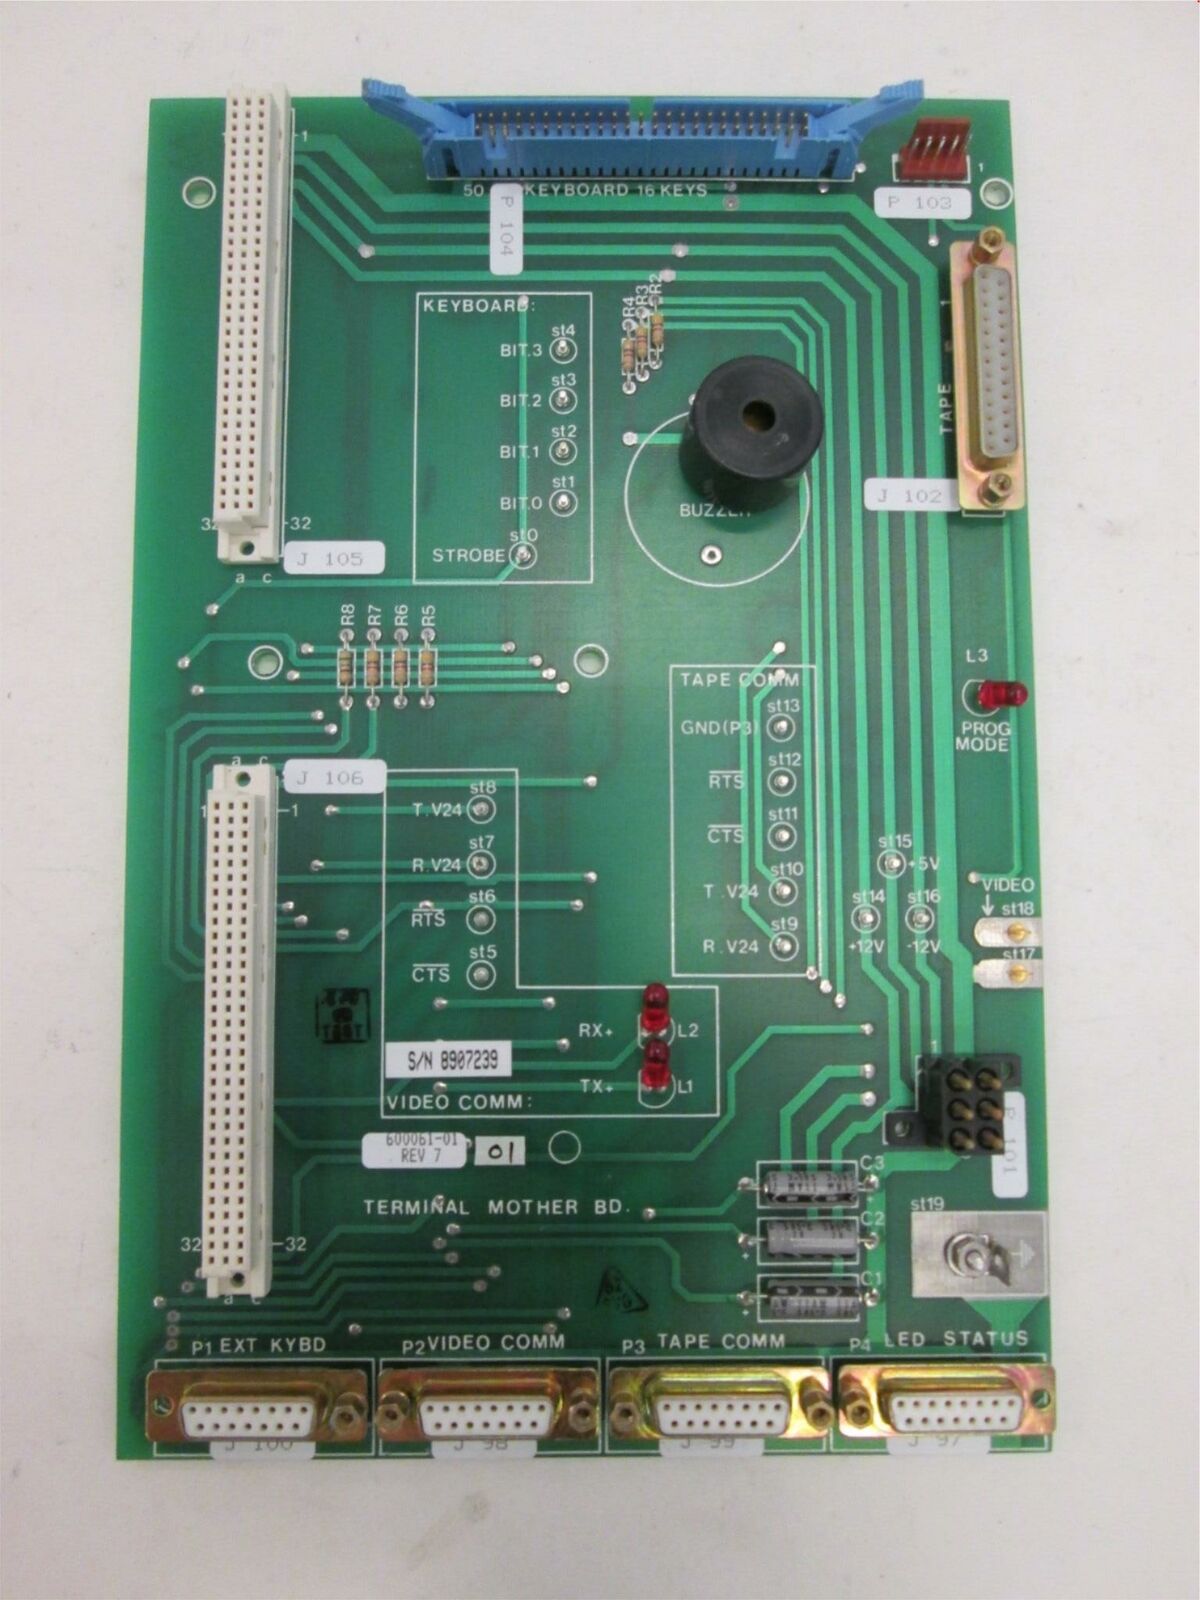 Thermco, 600061-01, Terminal Mother Board Assy, Used